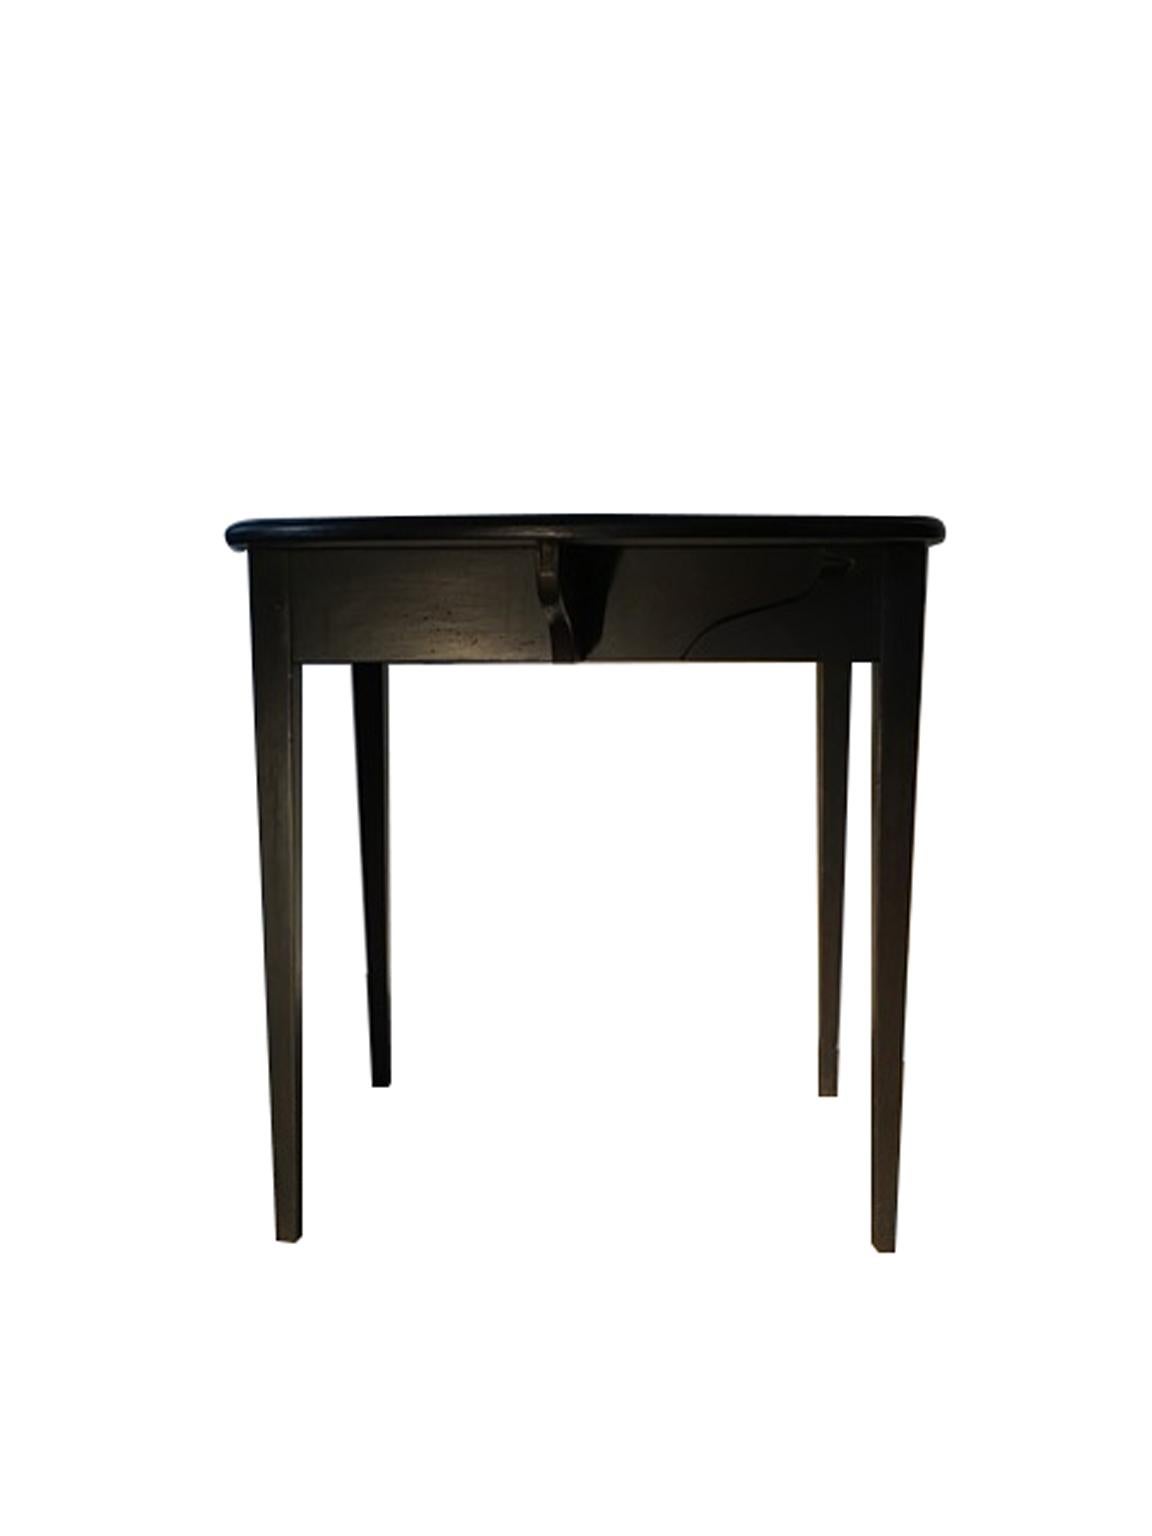 French Provincial Italy Walnut Drop-Leaf Table Black Lacquered Contemporary Production In Stock